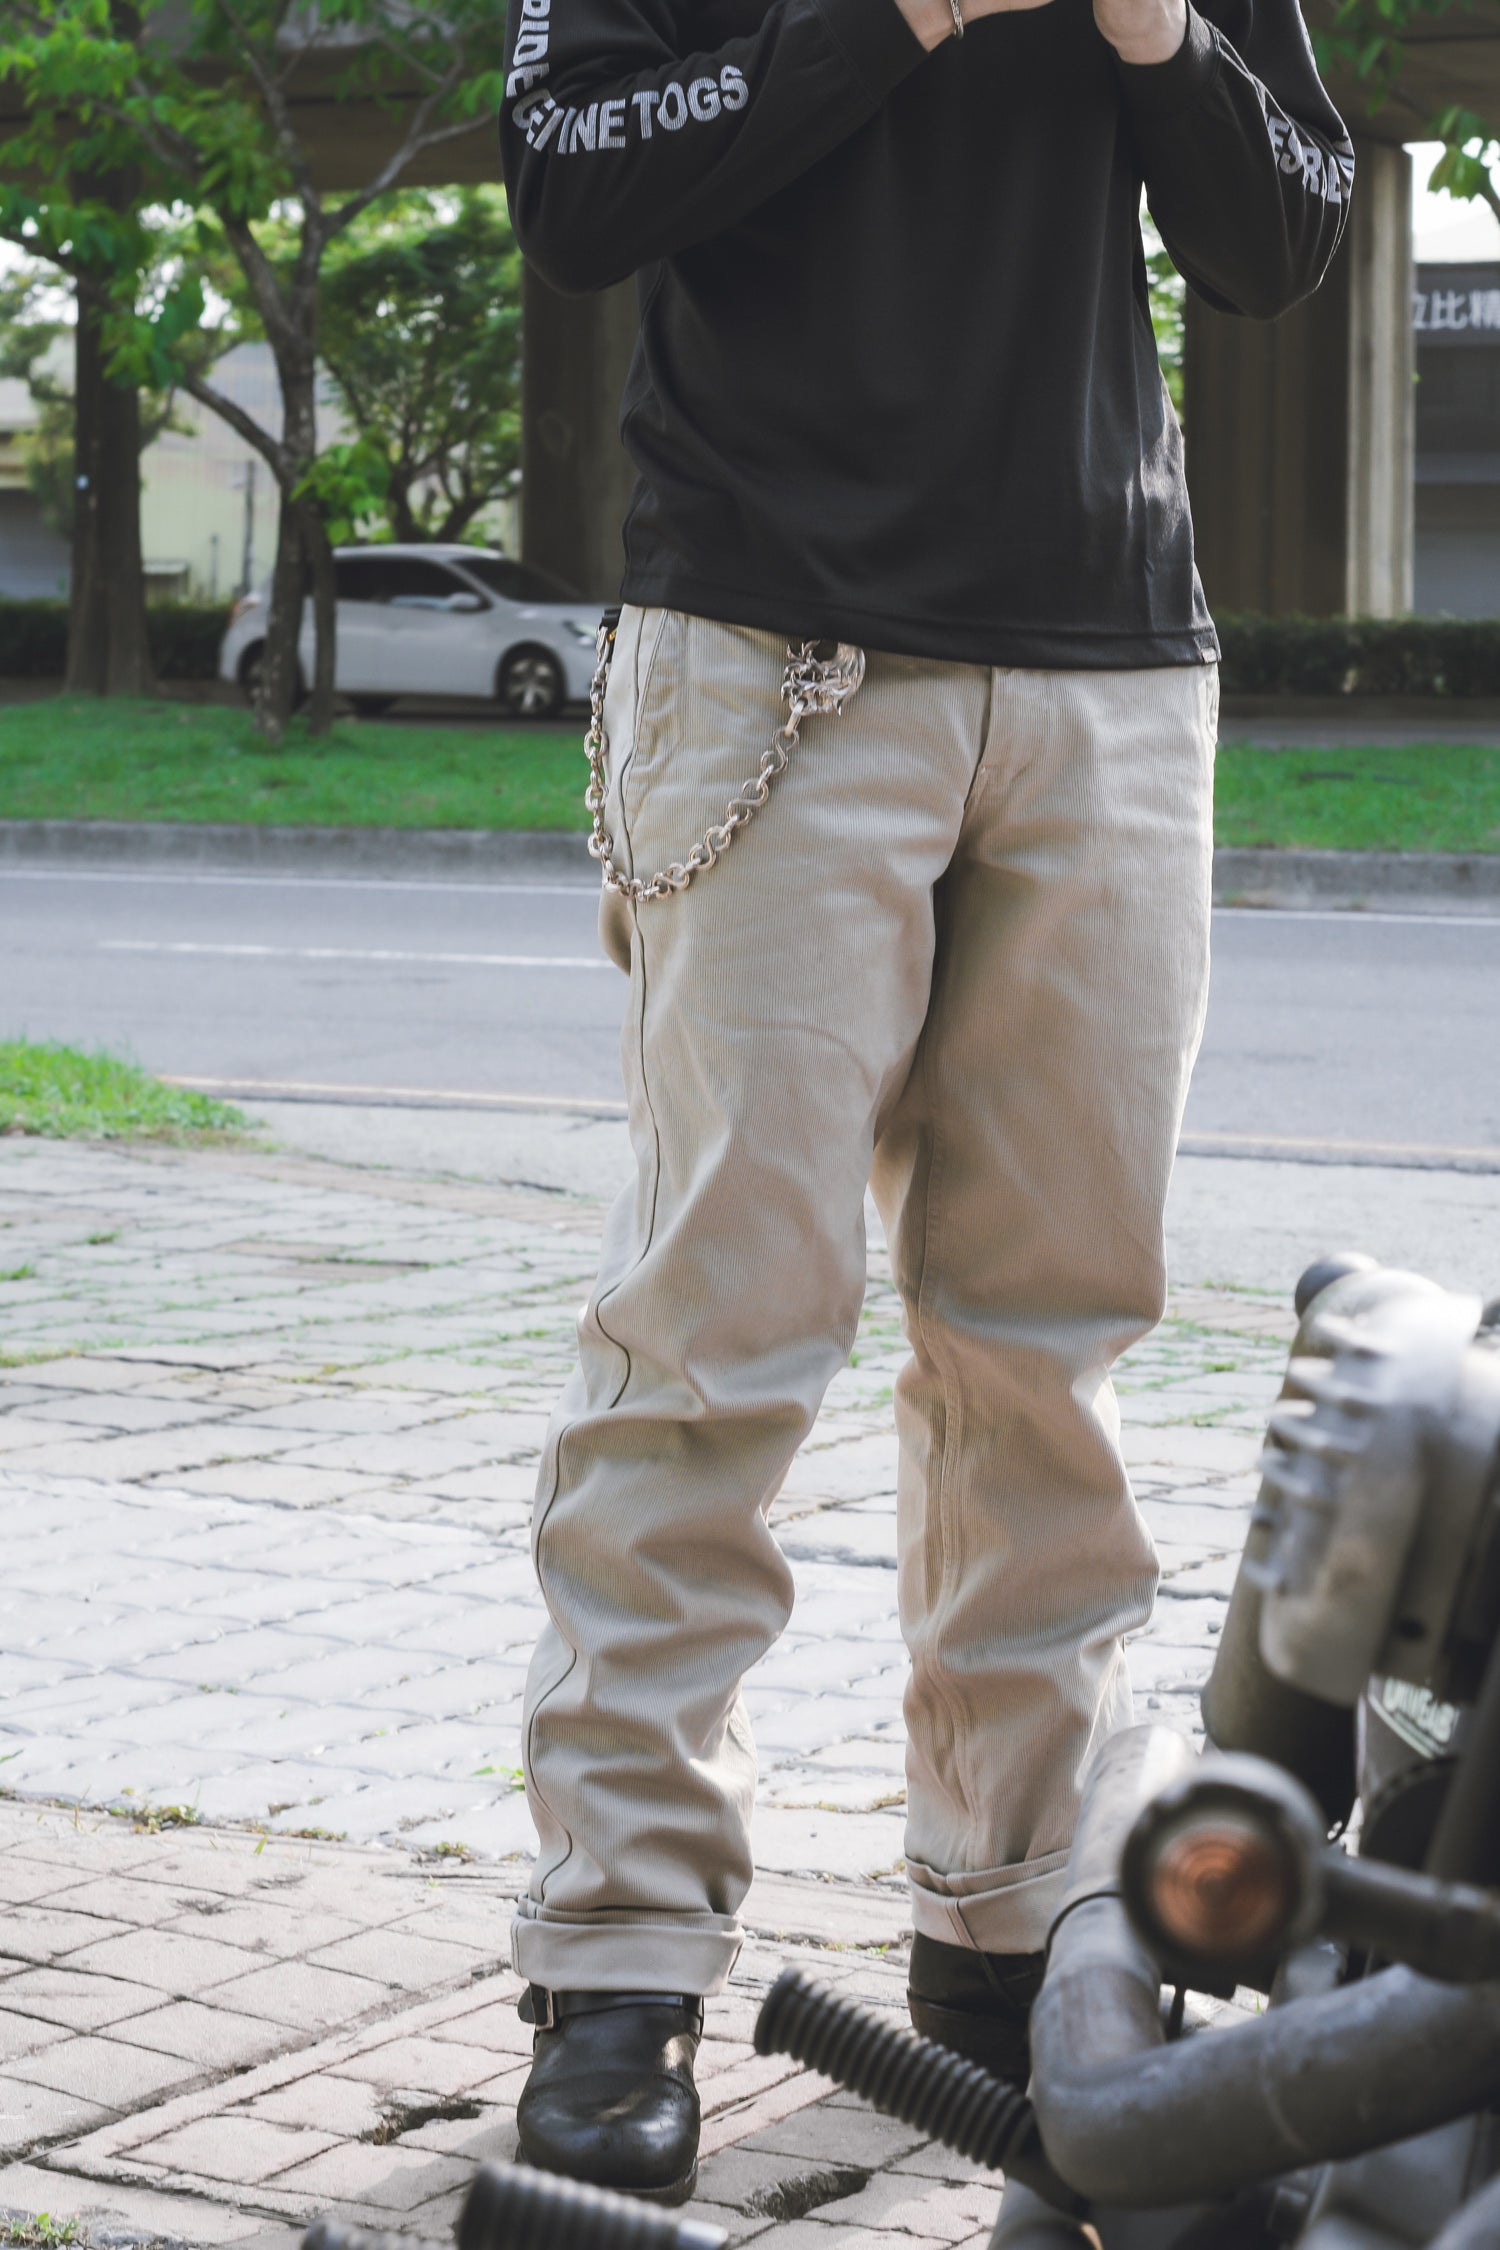 THICK RIDE PANTS - BEIGE (PIQUE CLOTH) - May club